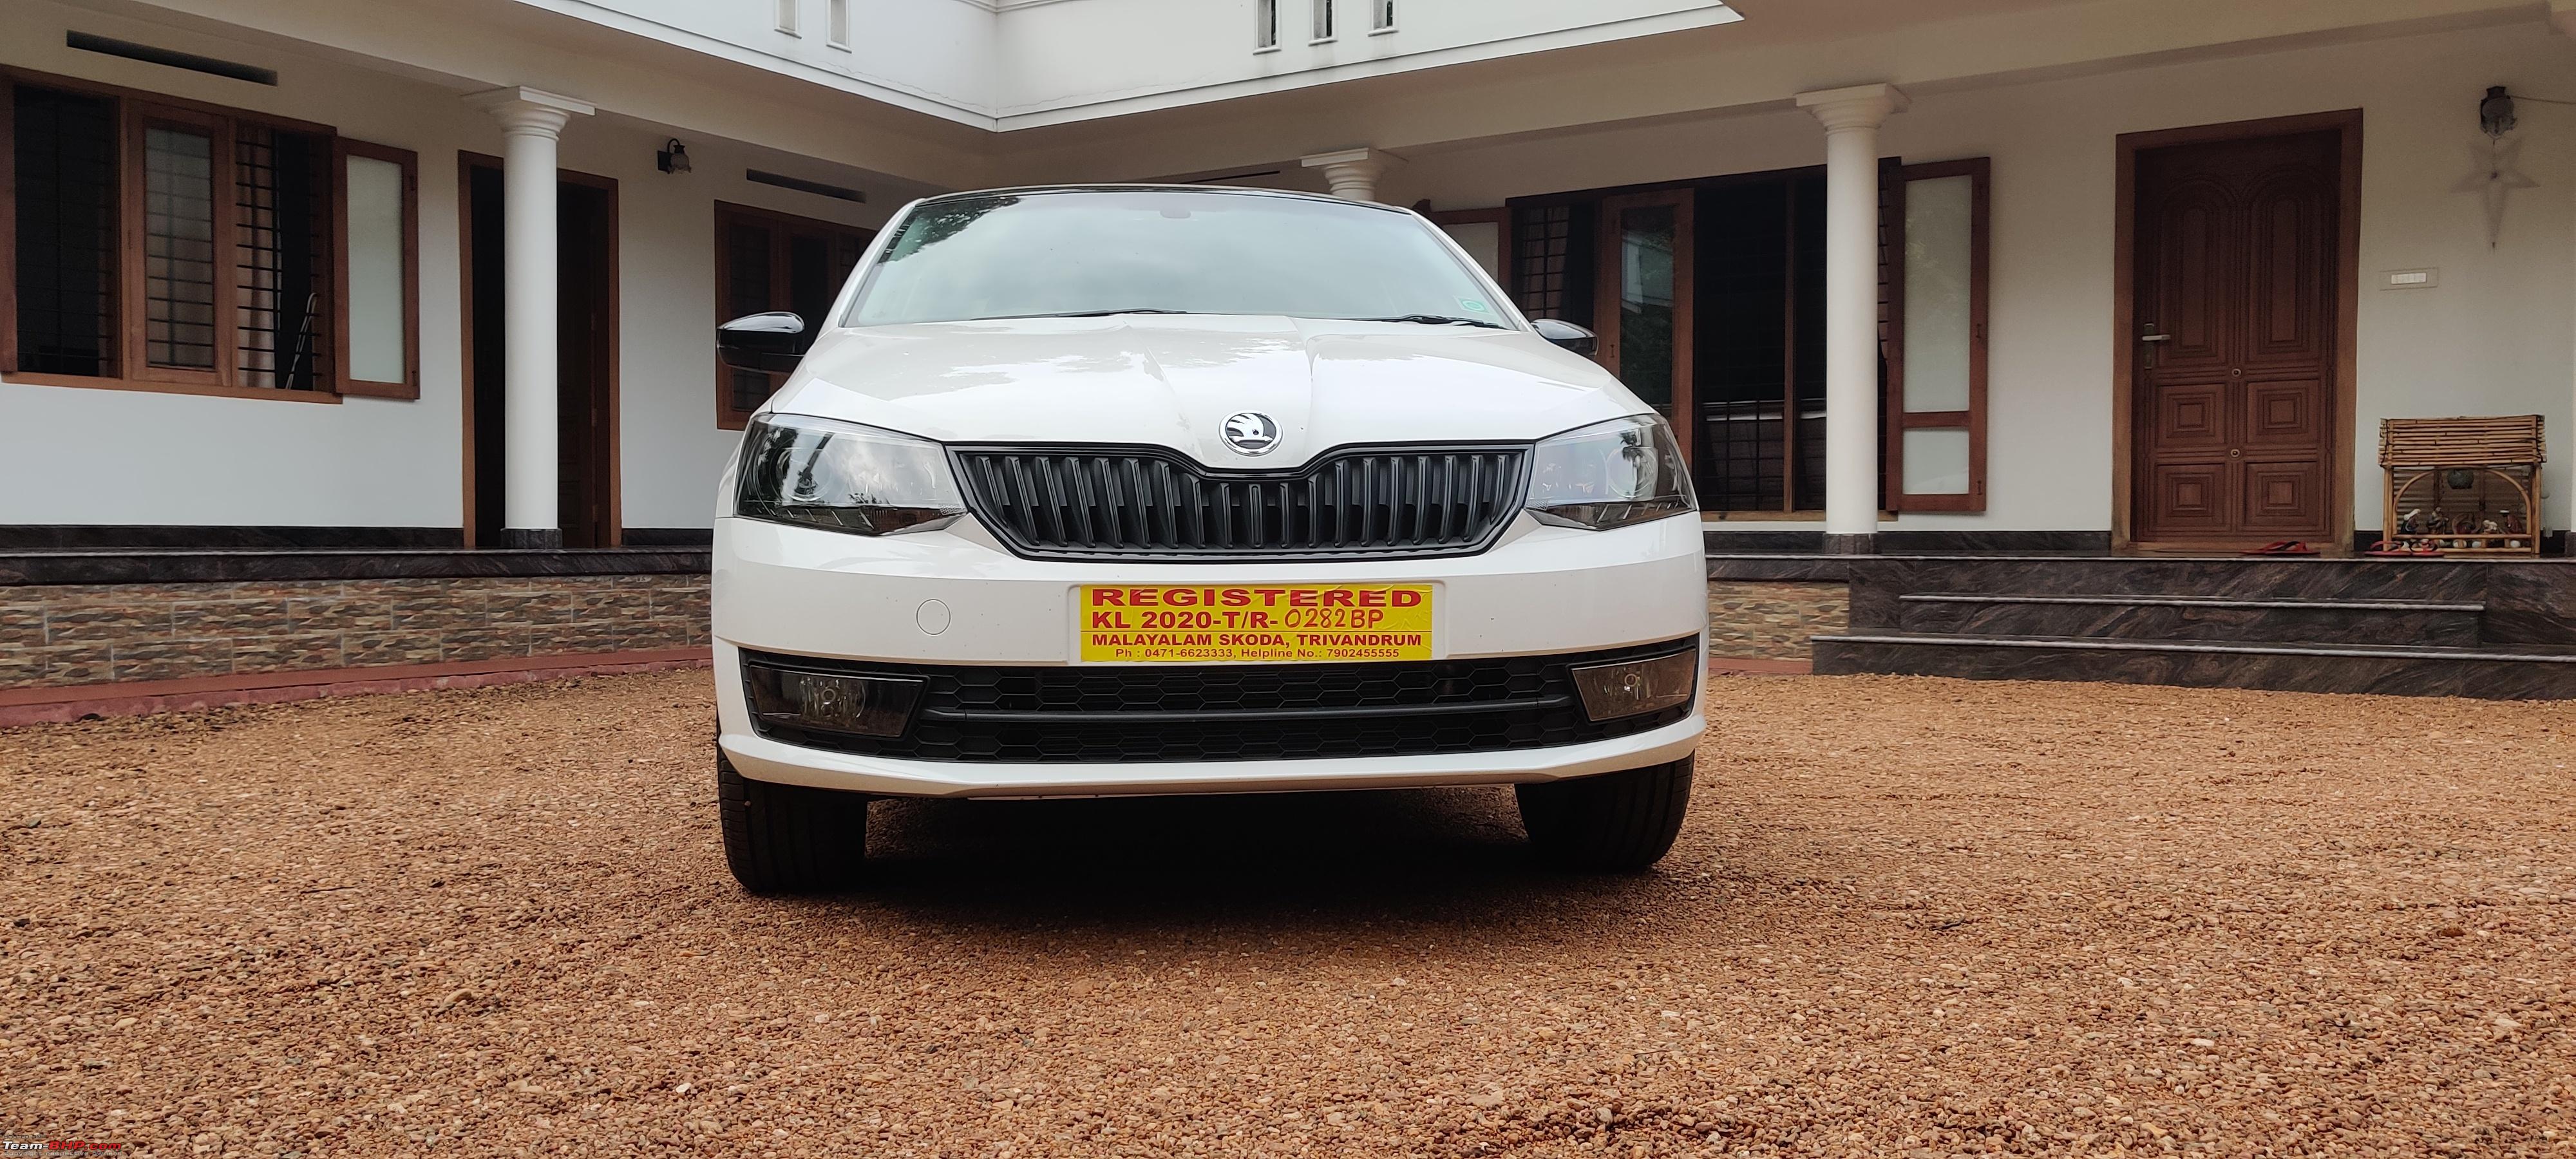 2020 Skoda Rapid TSI review, test drive - Introduction